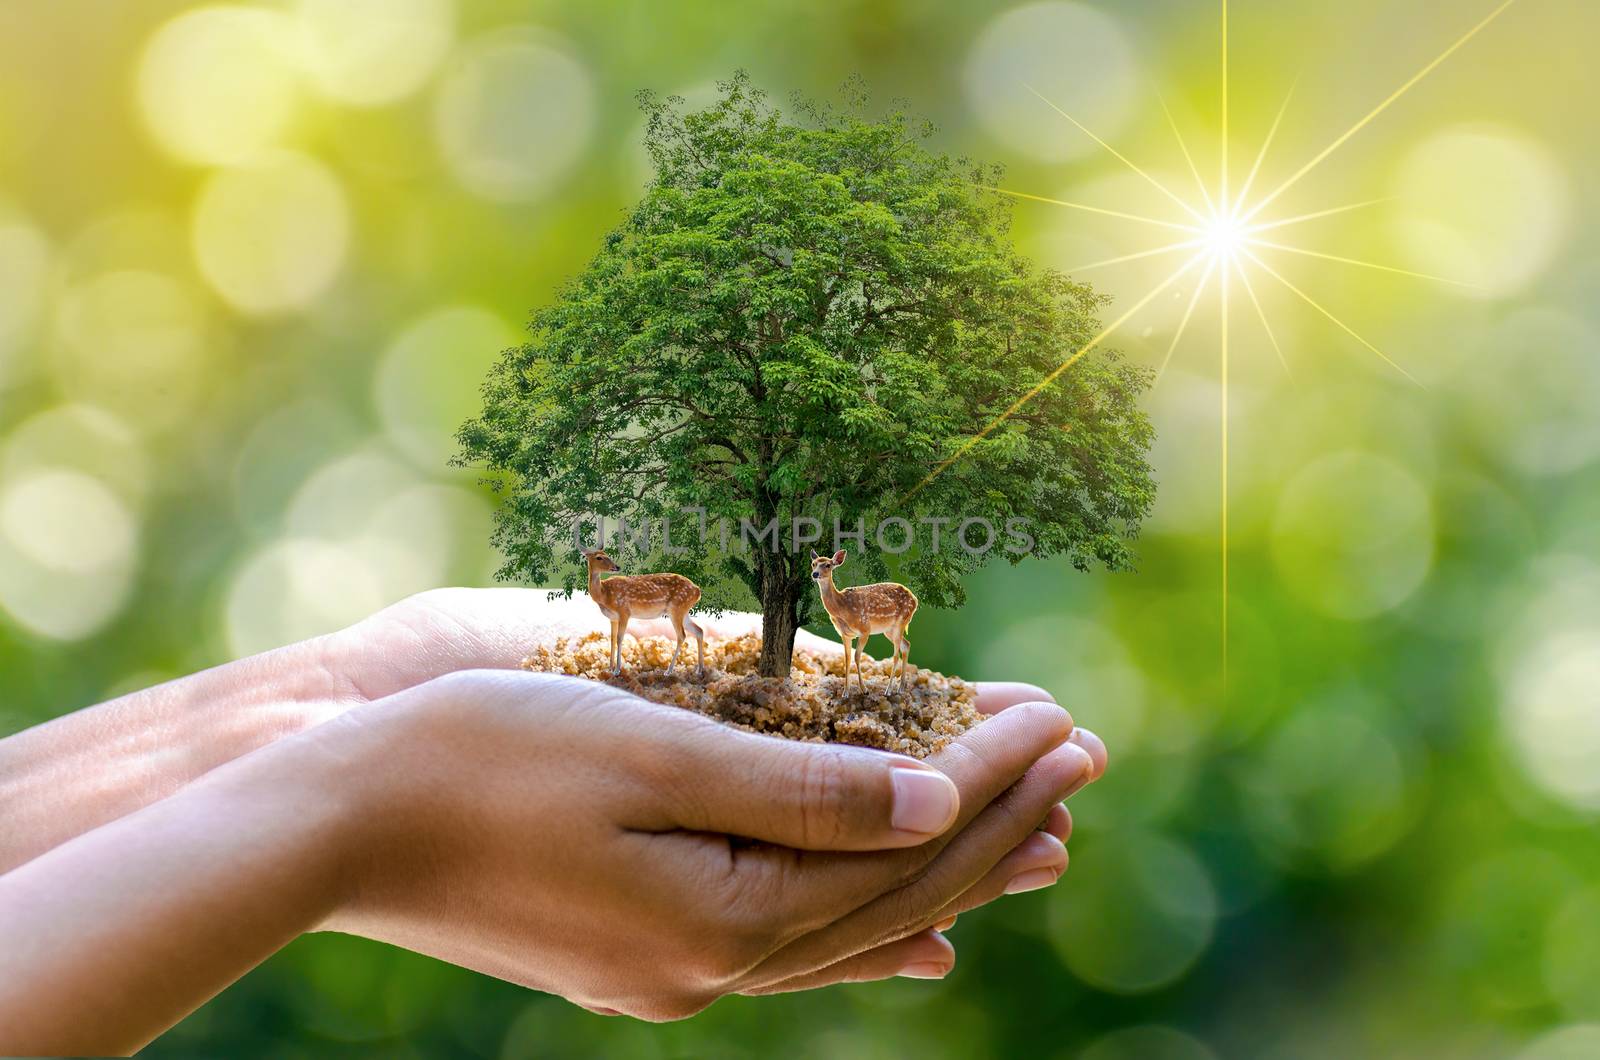 tree in the hands of trees growing seedlings. Bokeh green Background Female hand holding tree on nature field grass Forest conservation concept Two deer standing under a tree with sunlight. by sarayut_thaneerat